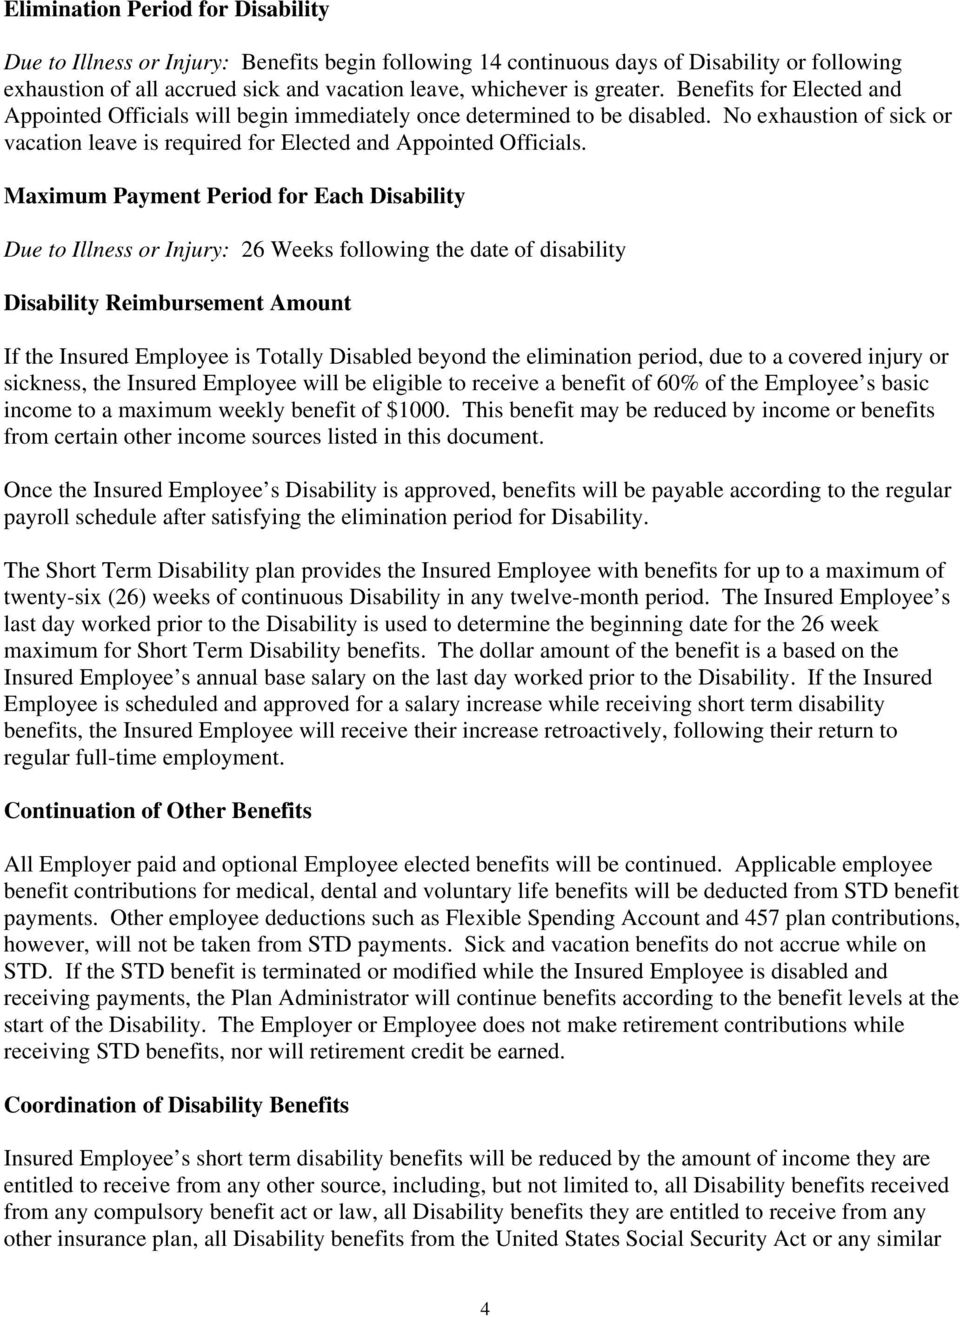 Maximum Payment Period for Each Disability Due to Illness or Injury: 26 Weeks following the date of disability Disability Reimbursement Amount If the Insured Employee is Totally Disabled beyond the